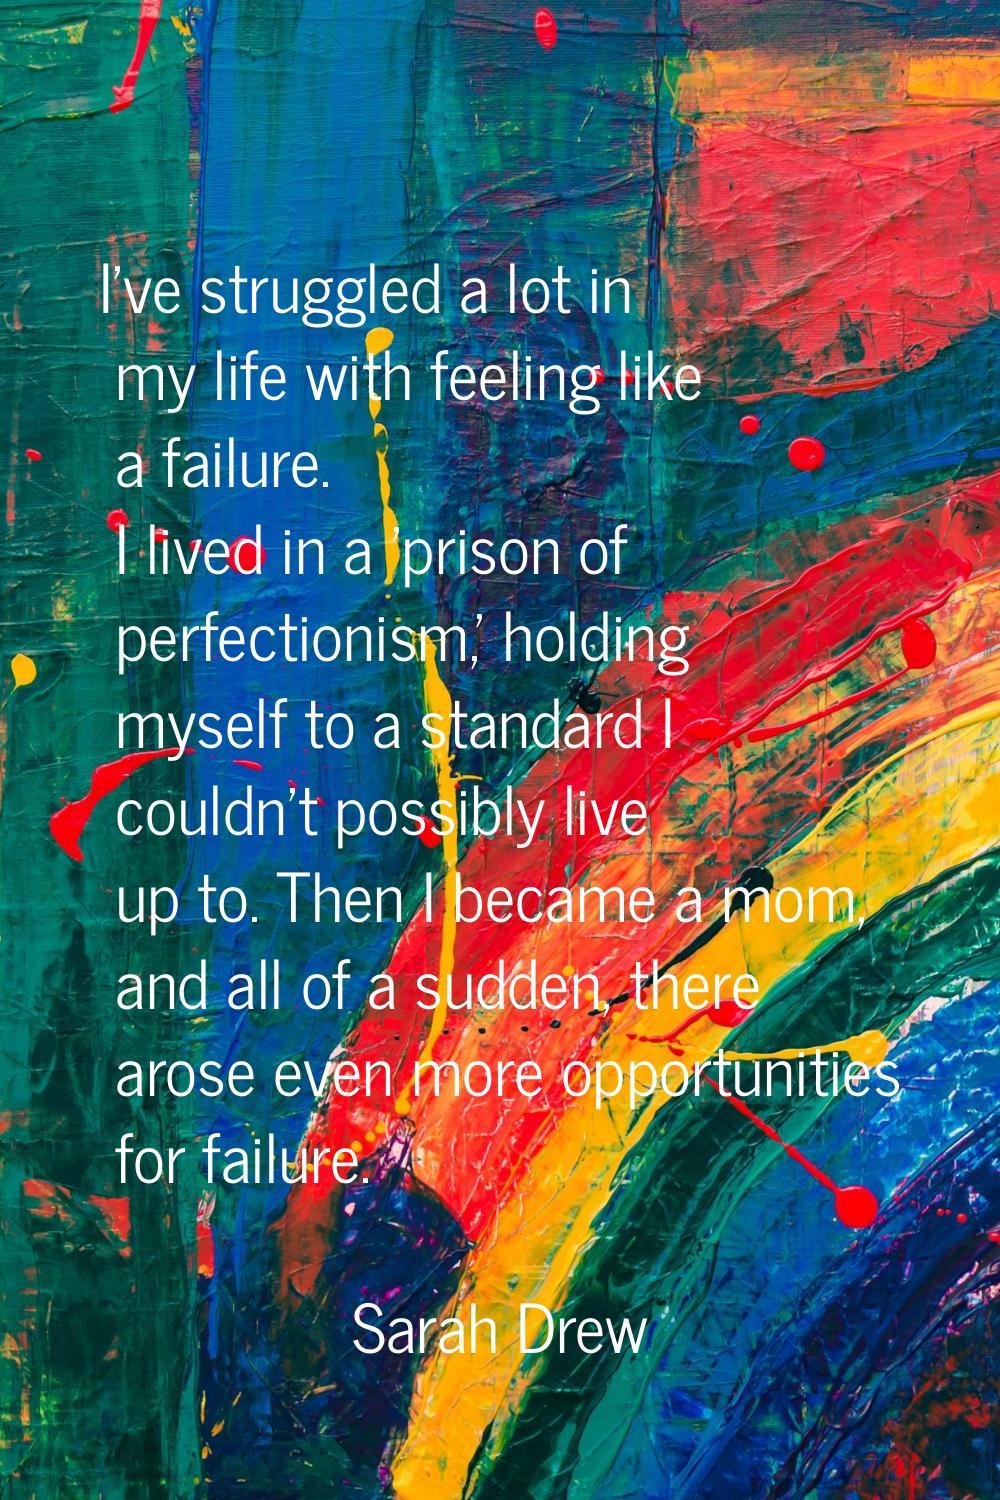 I've struggled a lot in my life with feeling like a failure. I lived in a 'prison of perfectionism,